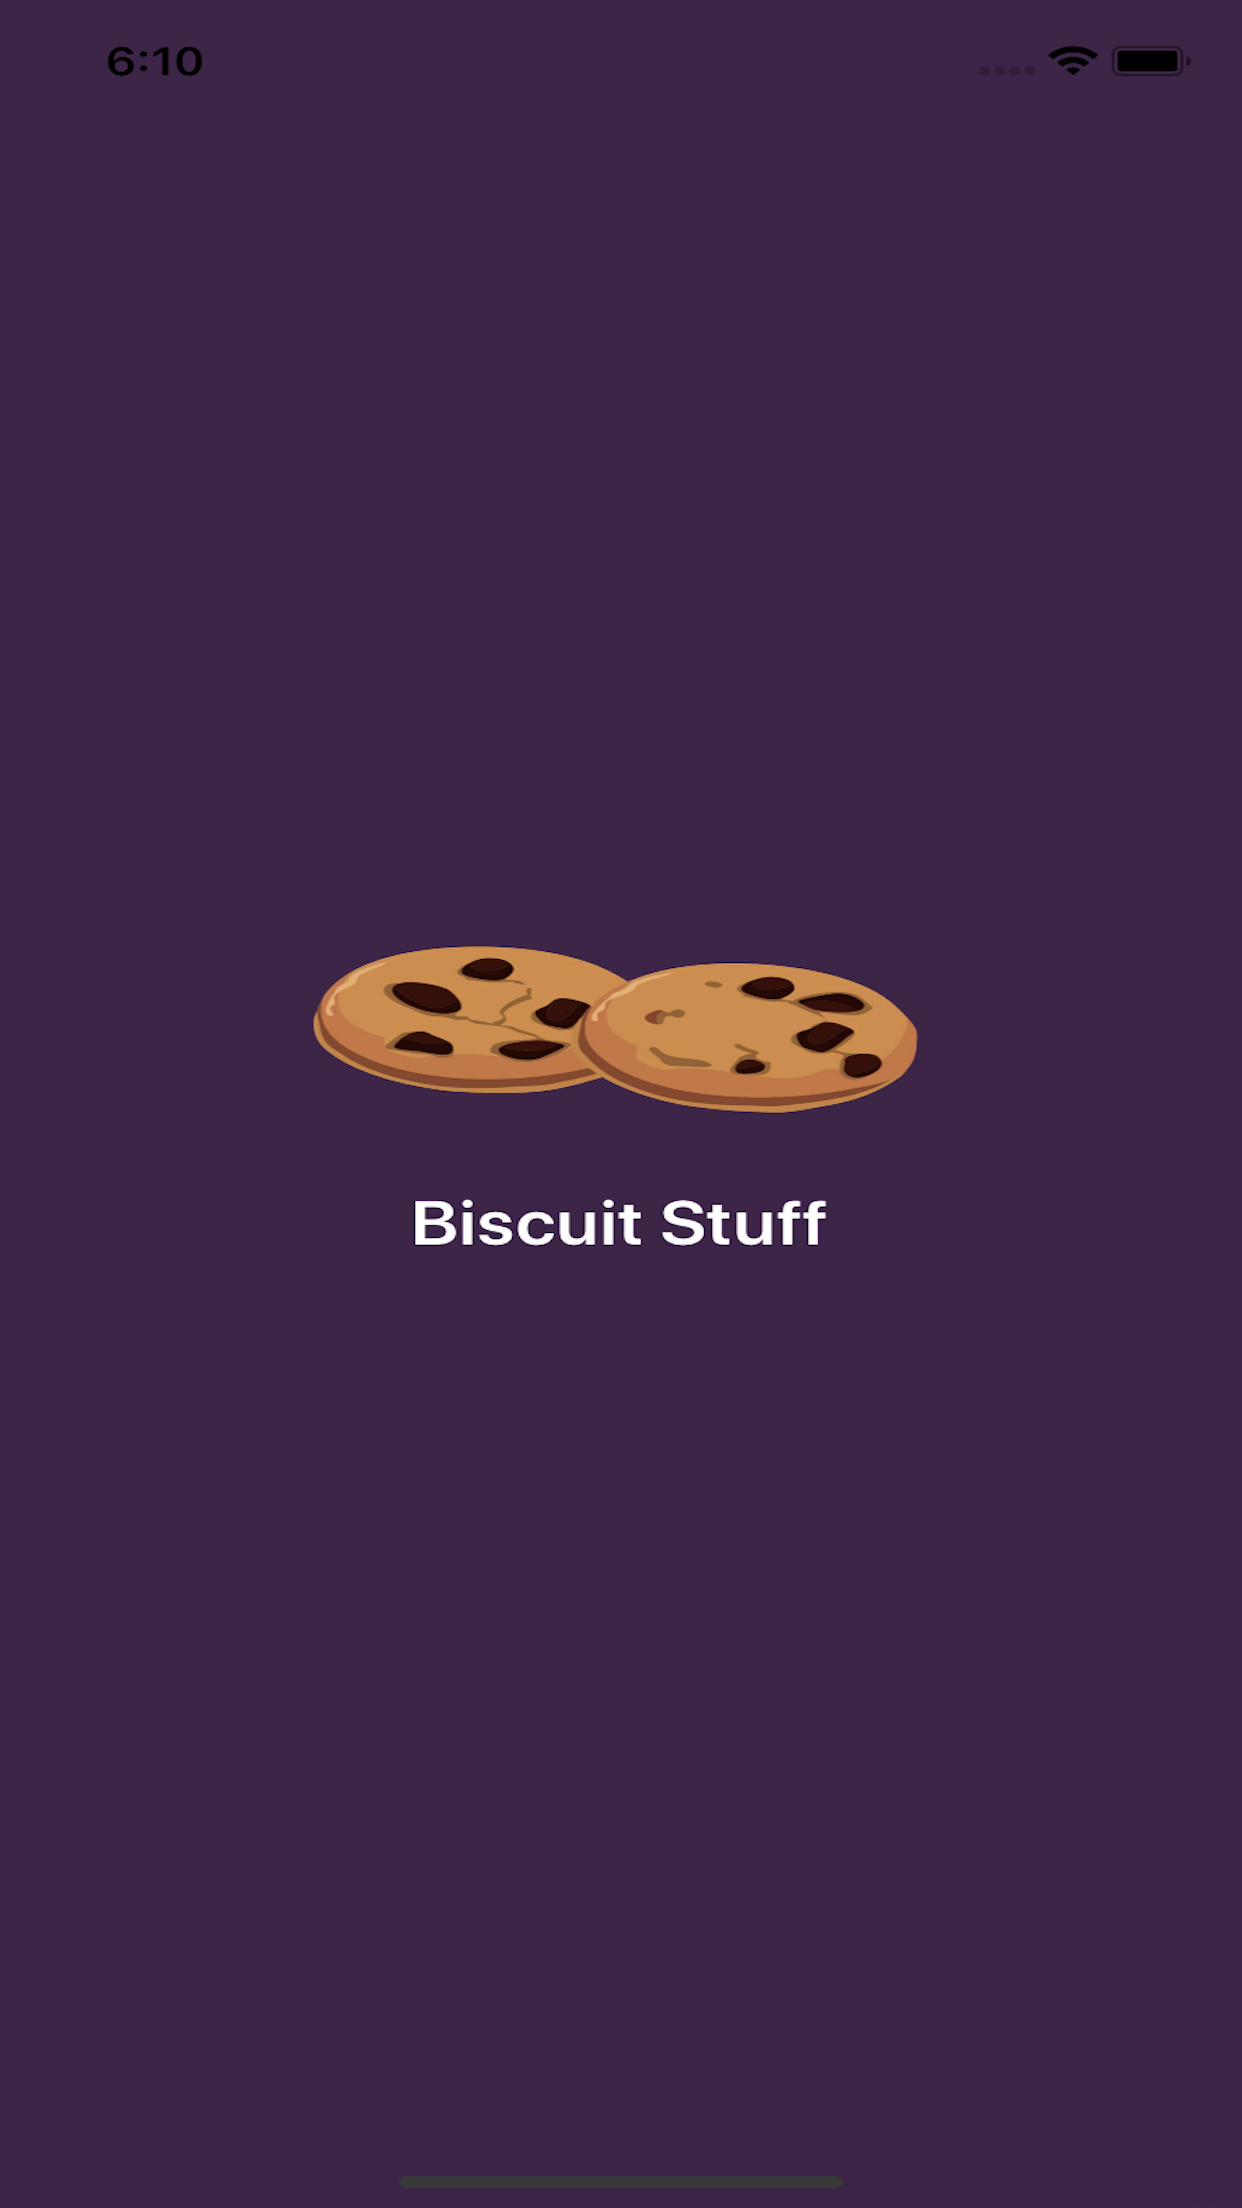 Biscuit-Stuff-Application